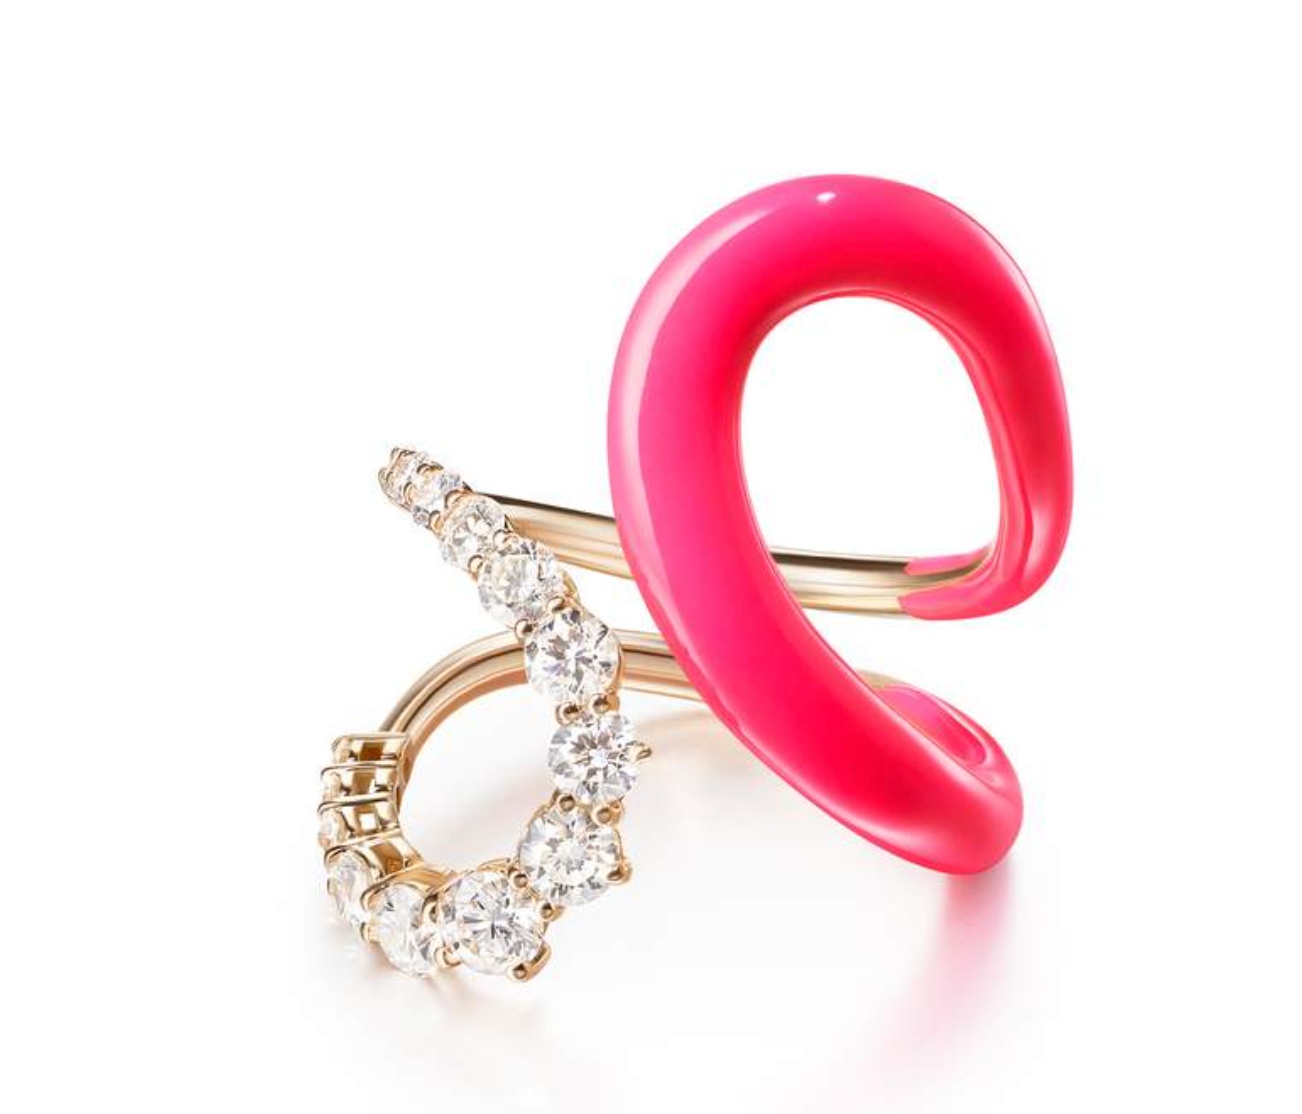 Aria Jane Ring: 18k pink gold with diamonds (1.14 tcw) and neon pink enamel, size 6